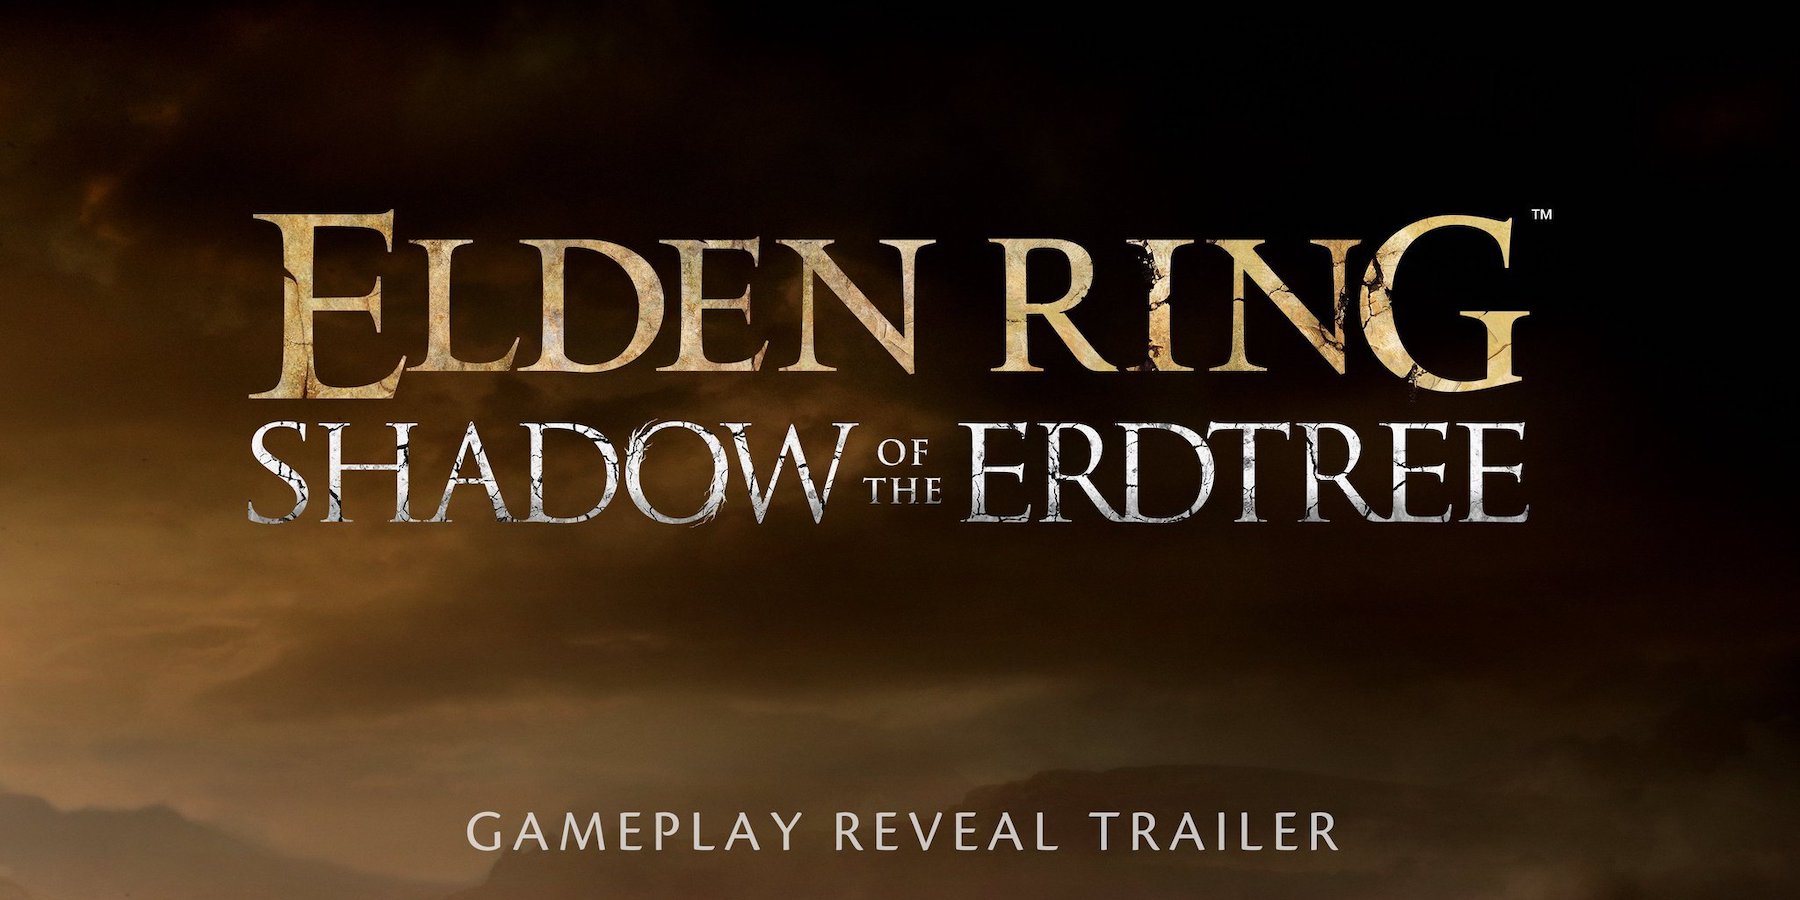 ELDEN RING Shadow of the Erdtree Collector's Edition